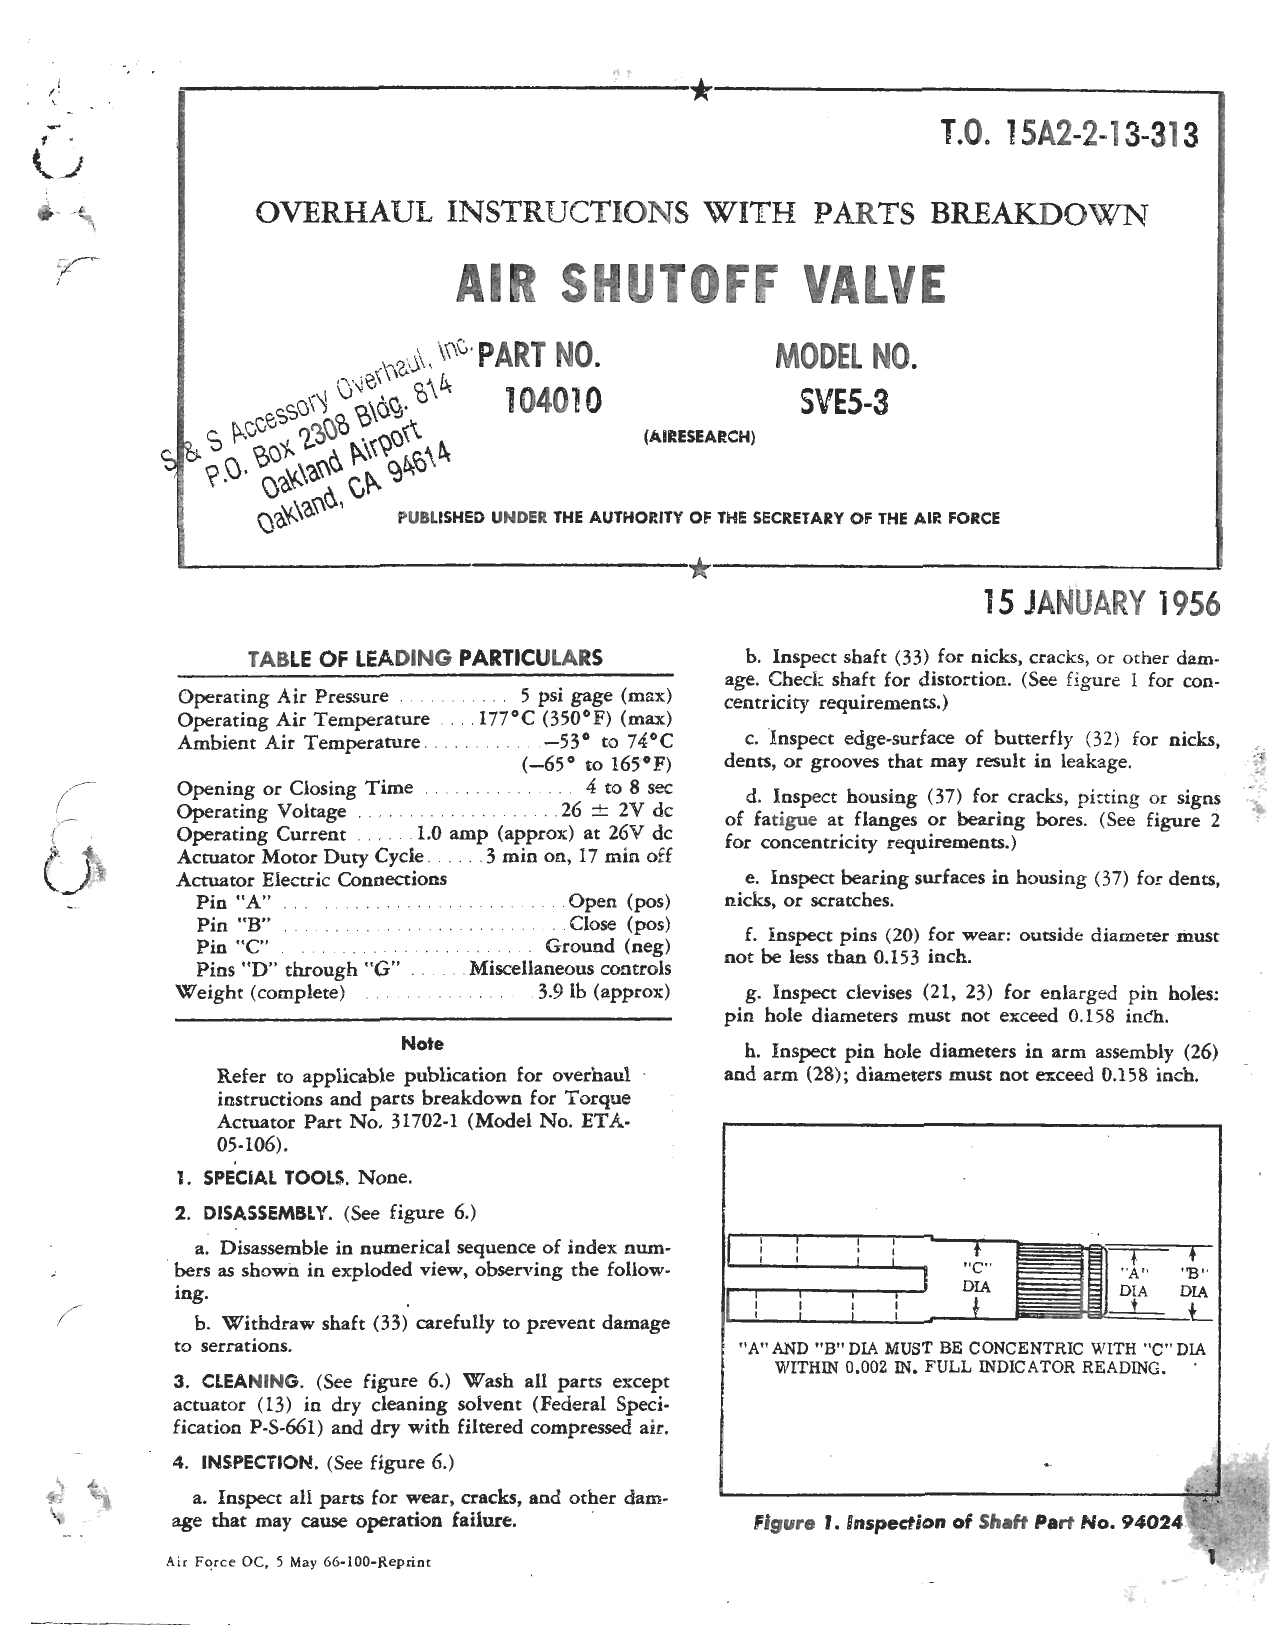 Sample page 1 from AirCorps Library document: Overhaul Instructions with Parts Breakdown for Air Shutoff Valve - Part 104010 - Model SVE5-3